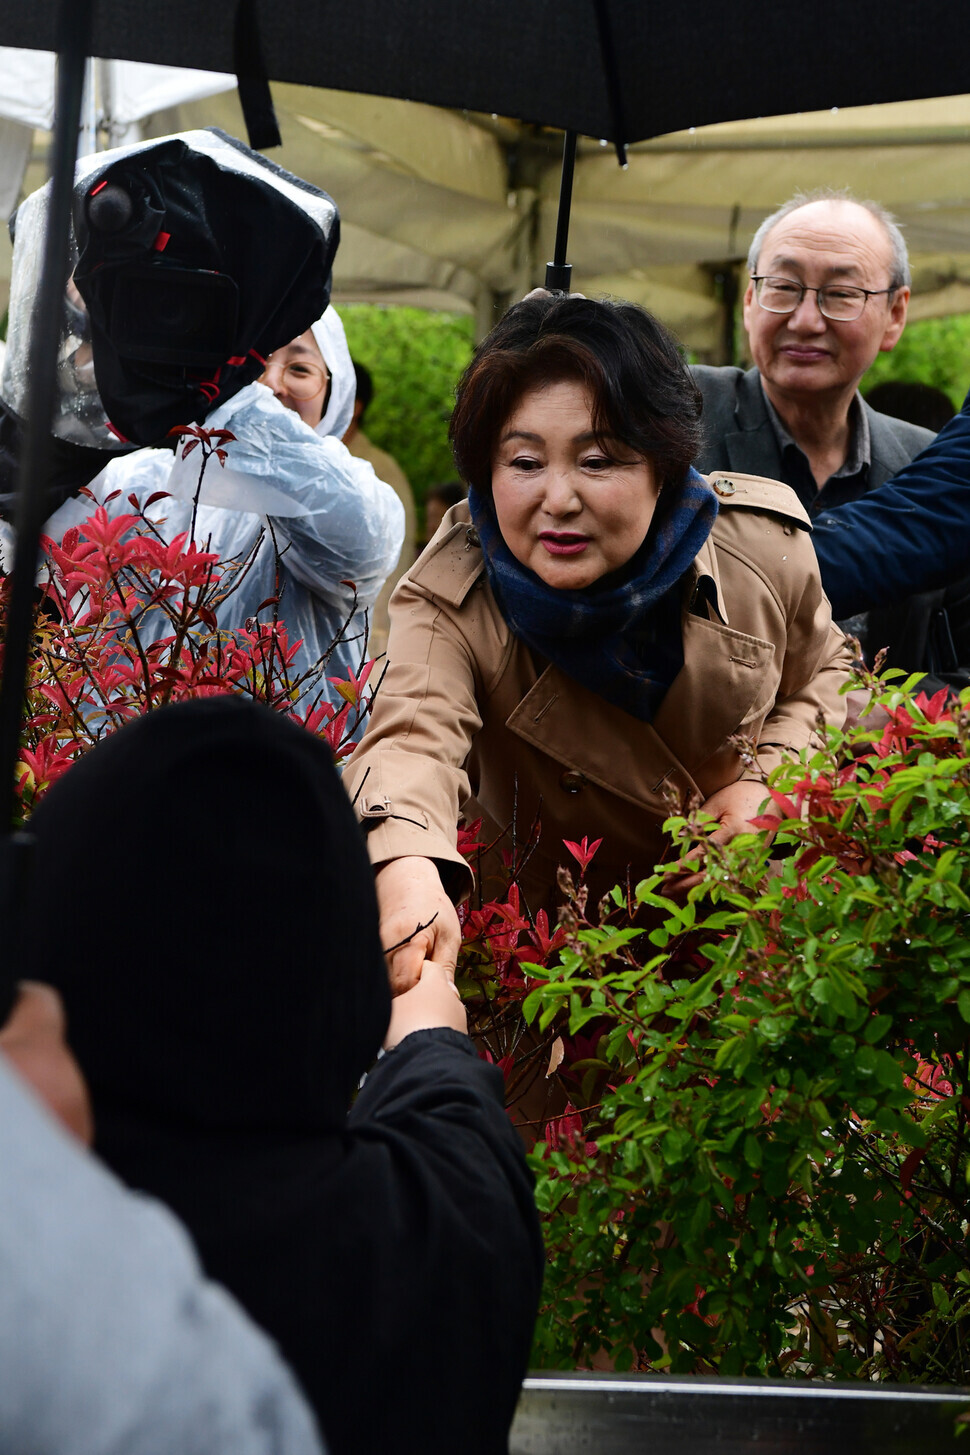 Kim Jung-sook, the former first lady, shakes hands with a visitor outside the former president’s bookshop in Pyeongsan, a village in the South Gyeongsang Province city of Yangsan on April 25. (pool photo)